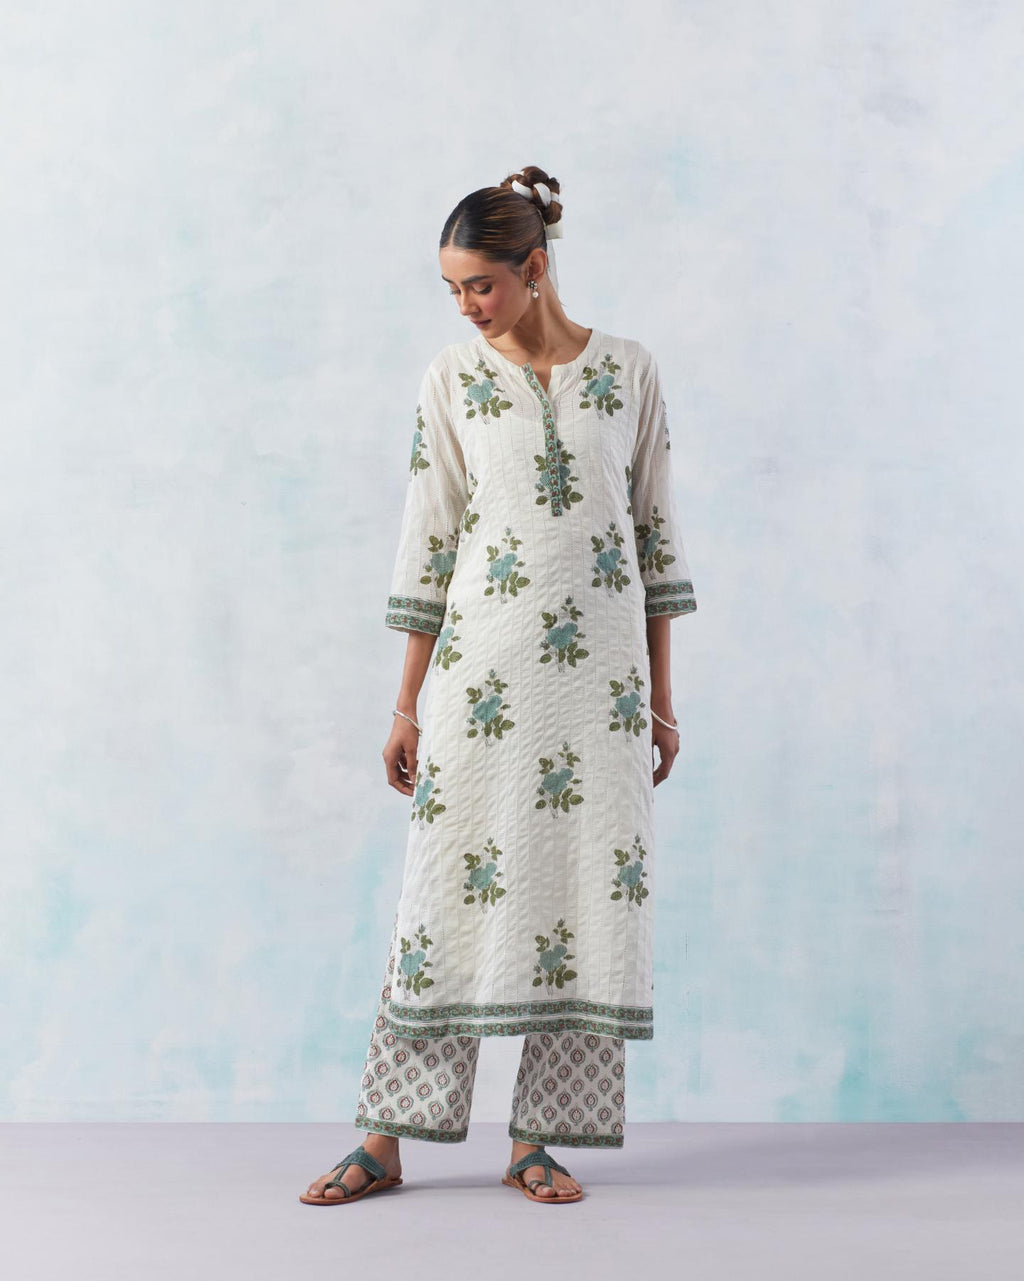 Off white cotton hand block printed straight kurta set with all-over teal green flower boota and faggoting detailing.